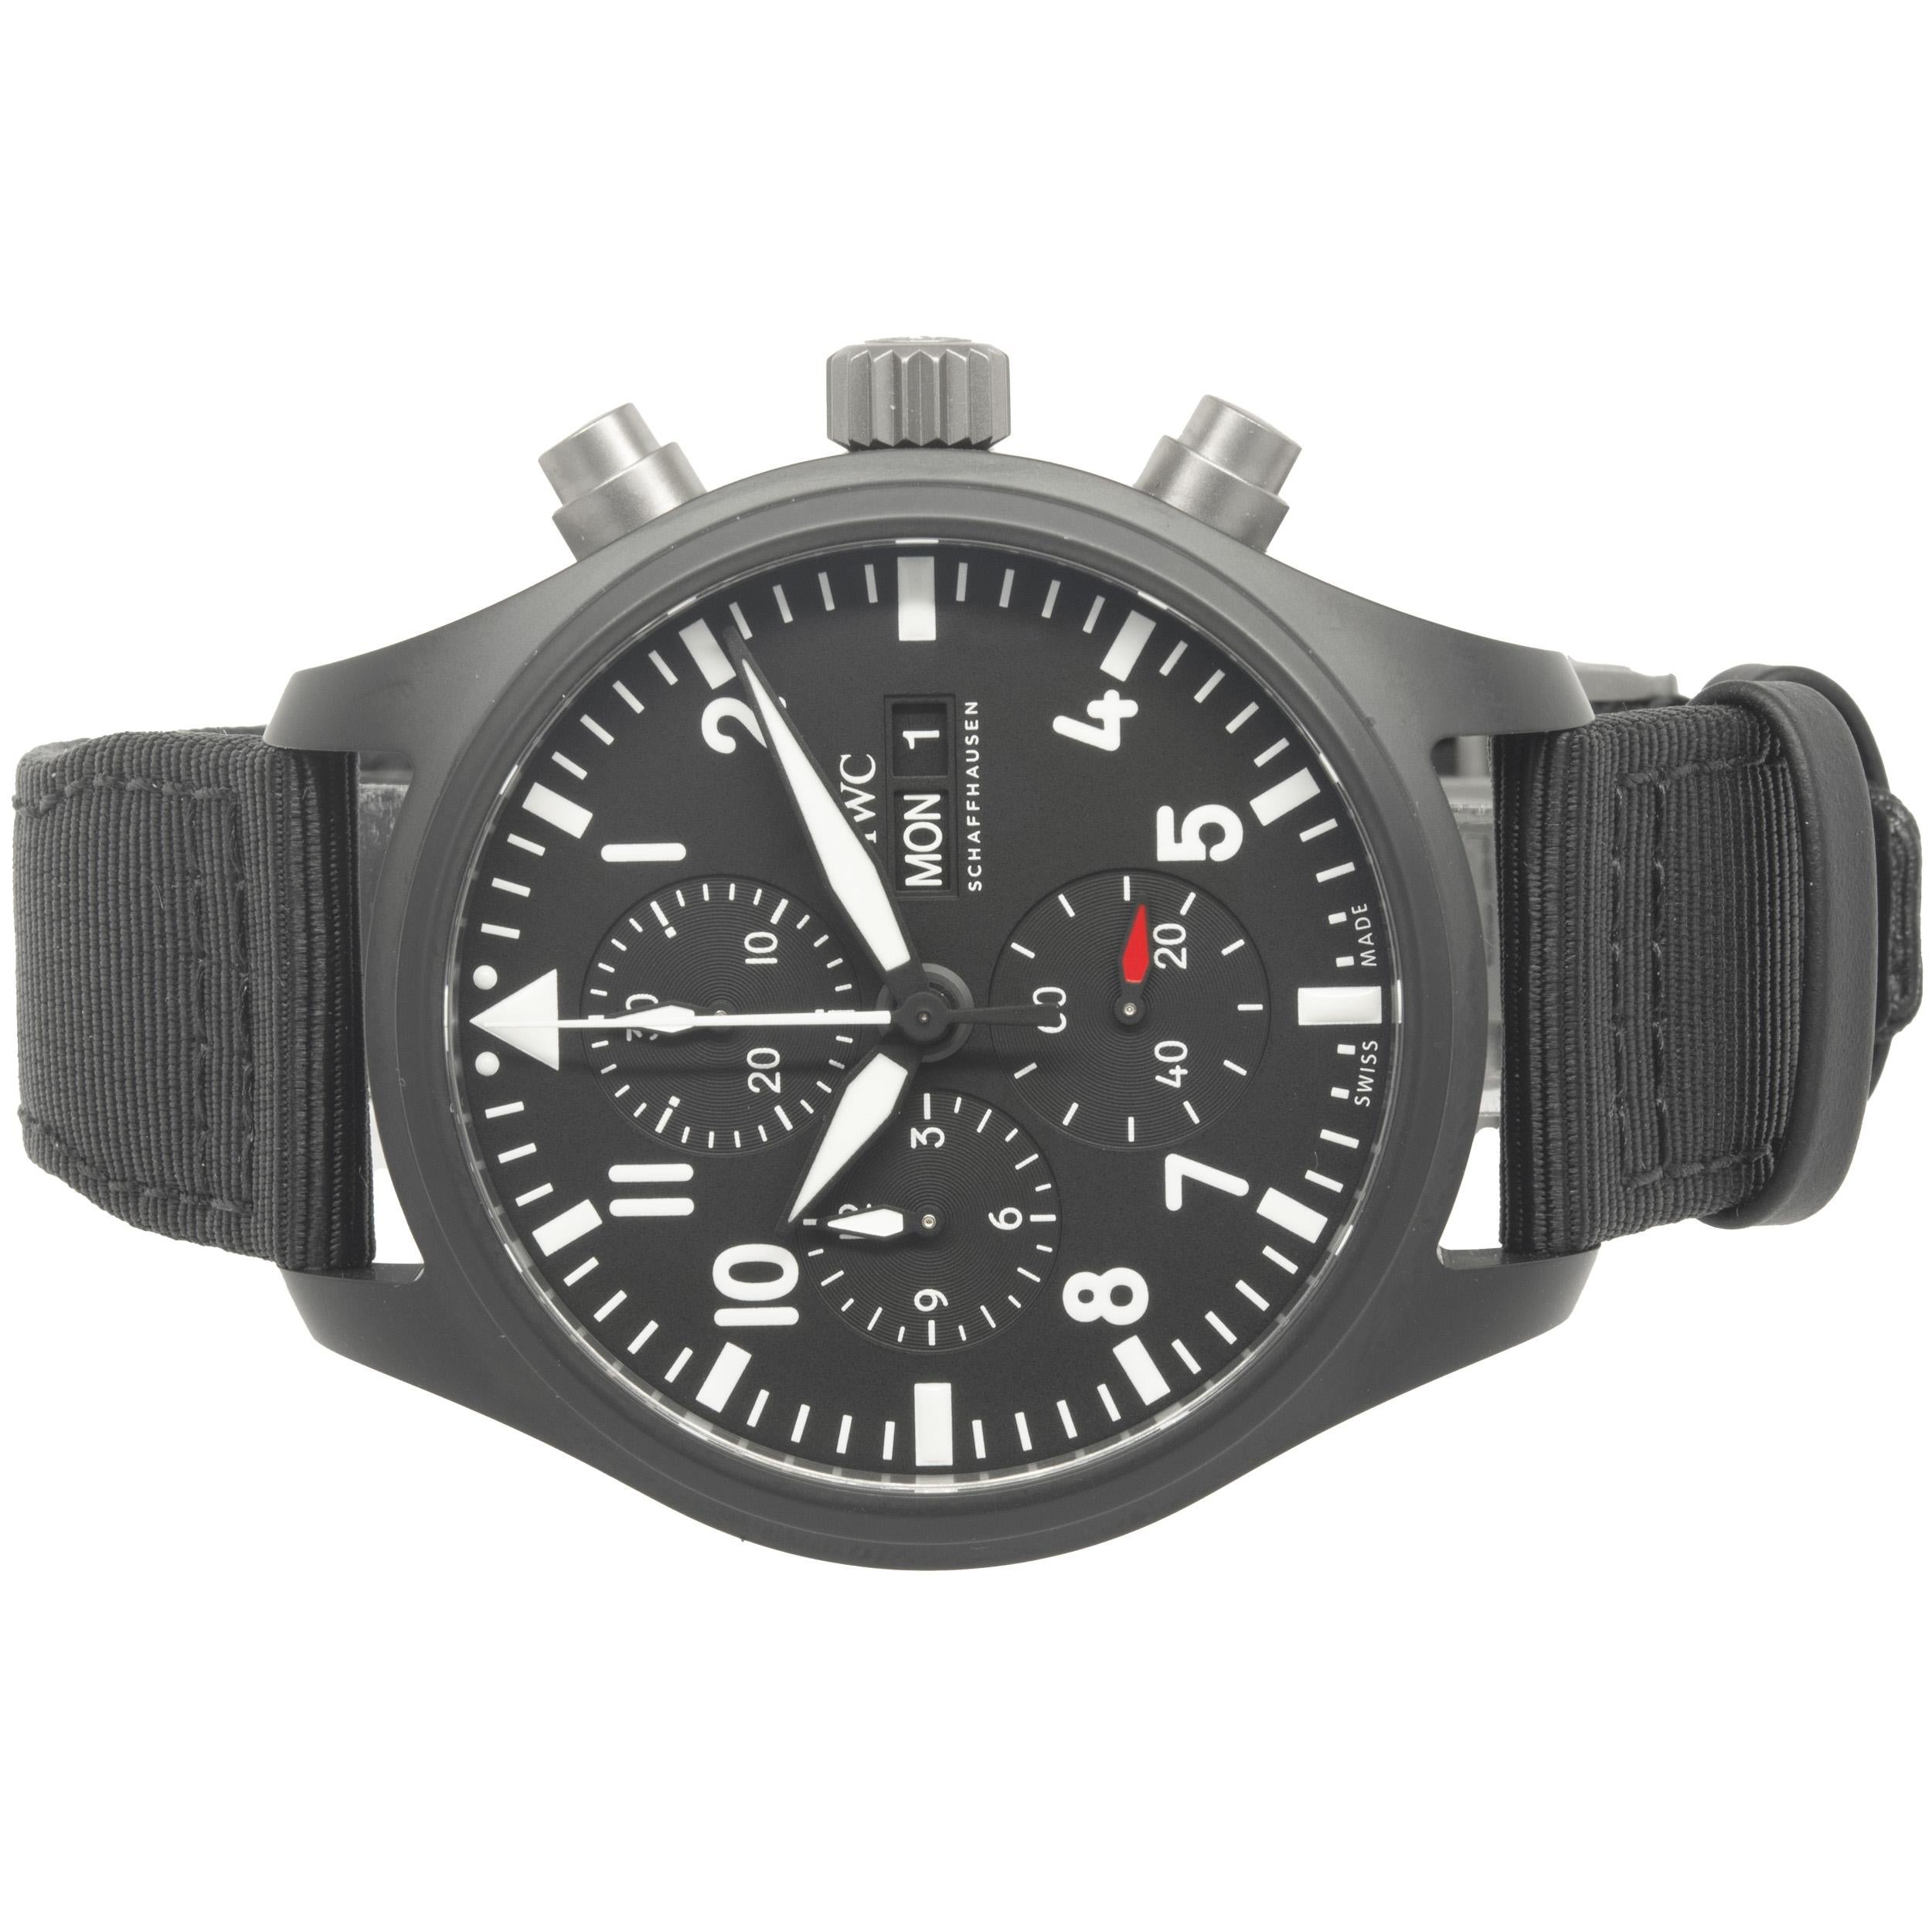 Brand: IWC
Movement: automatic
Function: hour, minutes, seconds, day, date, chronograph 
Case: 44.5mm black ceramic round case, sapphire crystal, push/pull crown
Band: black textile strap, integrated clasp
Dial: black chronograph 
Reference #: